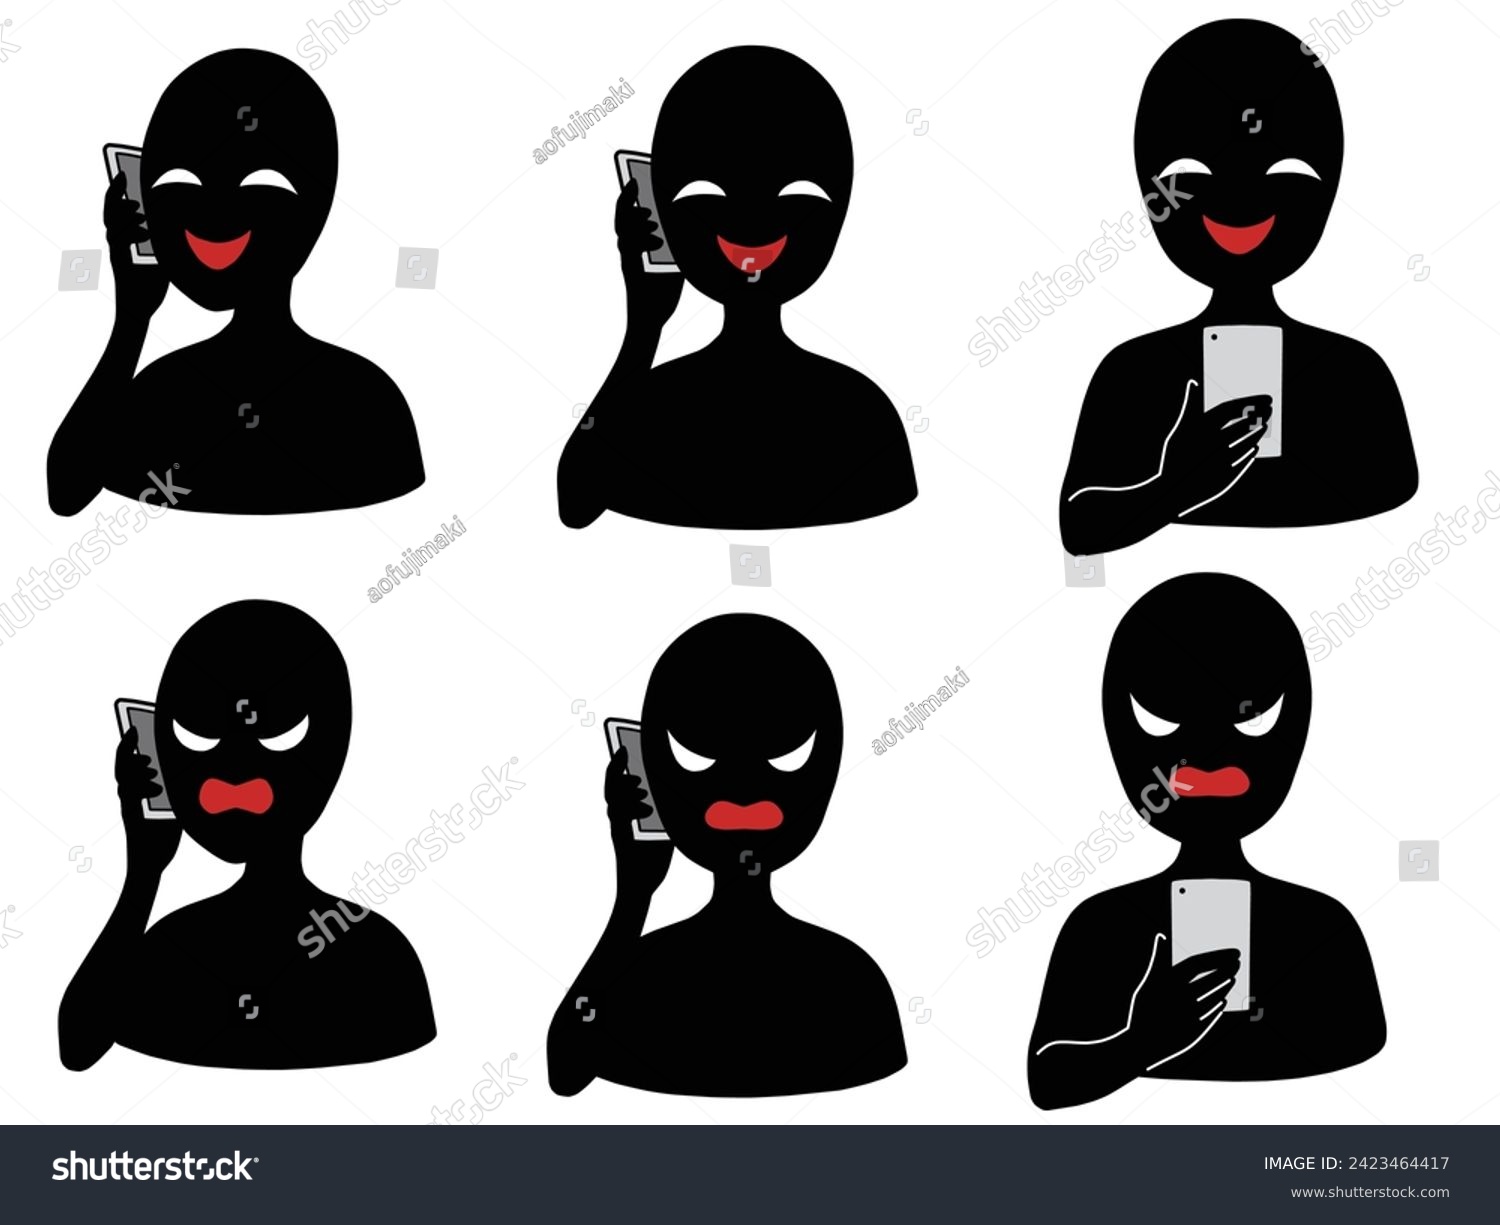 SVG of Illustration material set of a person with the image of a bad guy talking on a smartphone svg